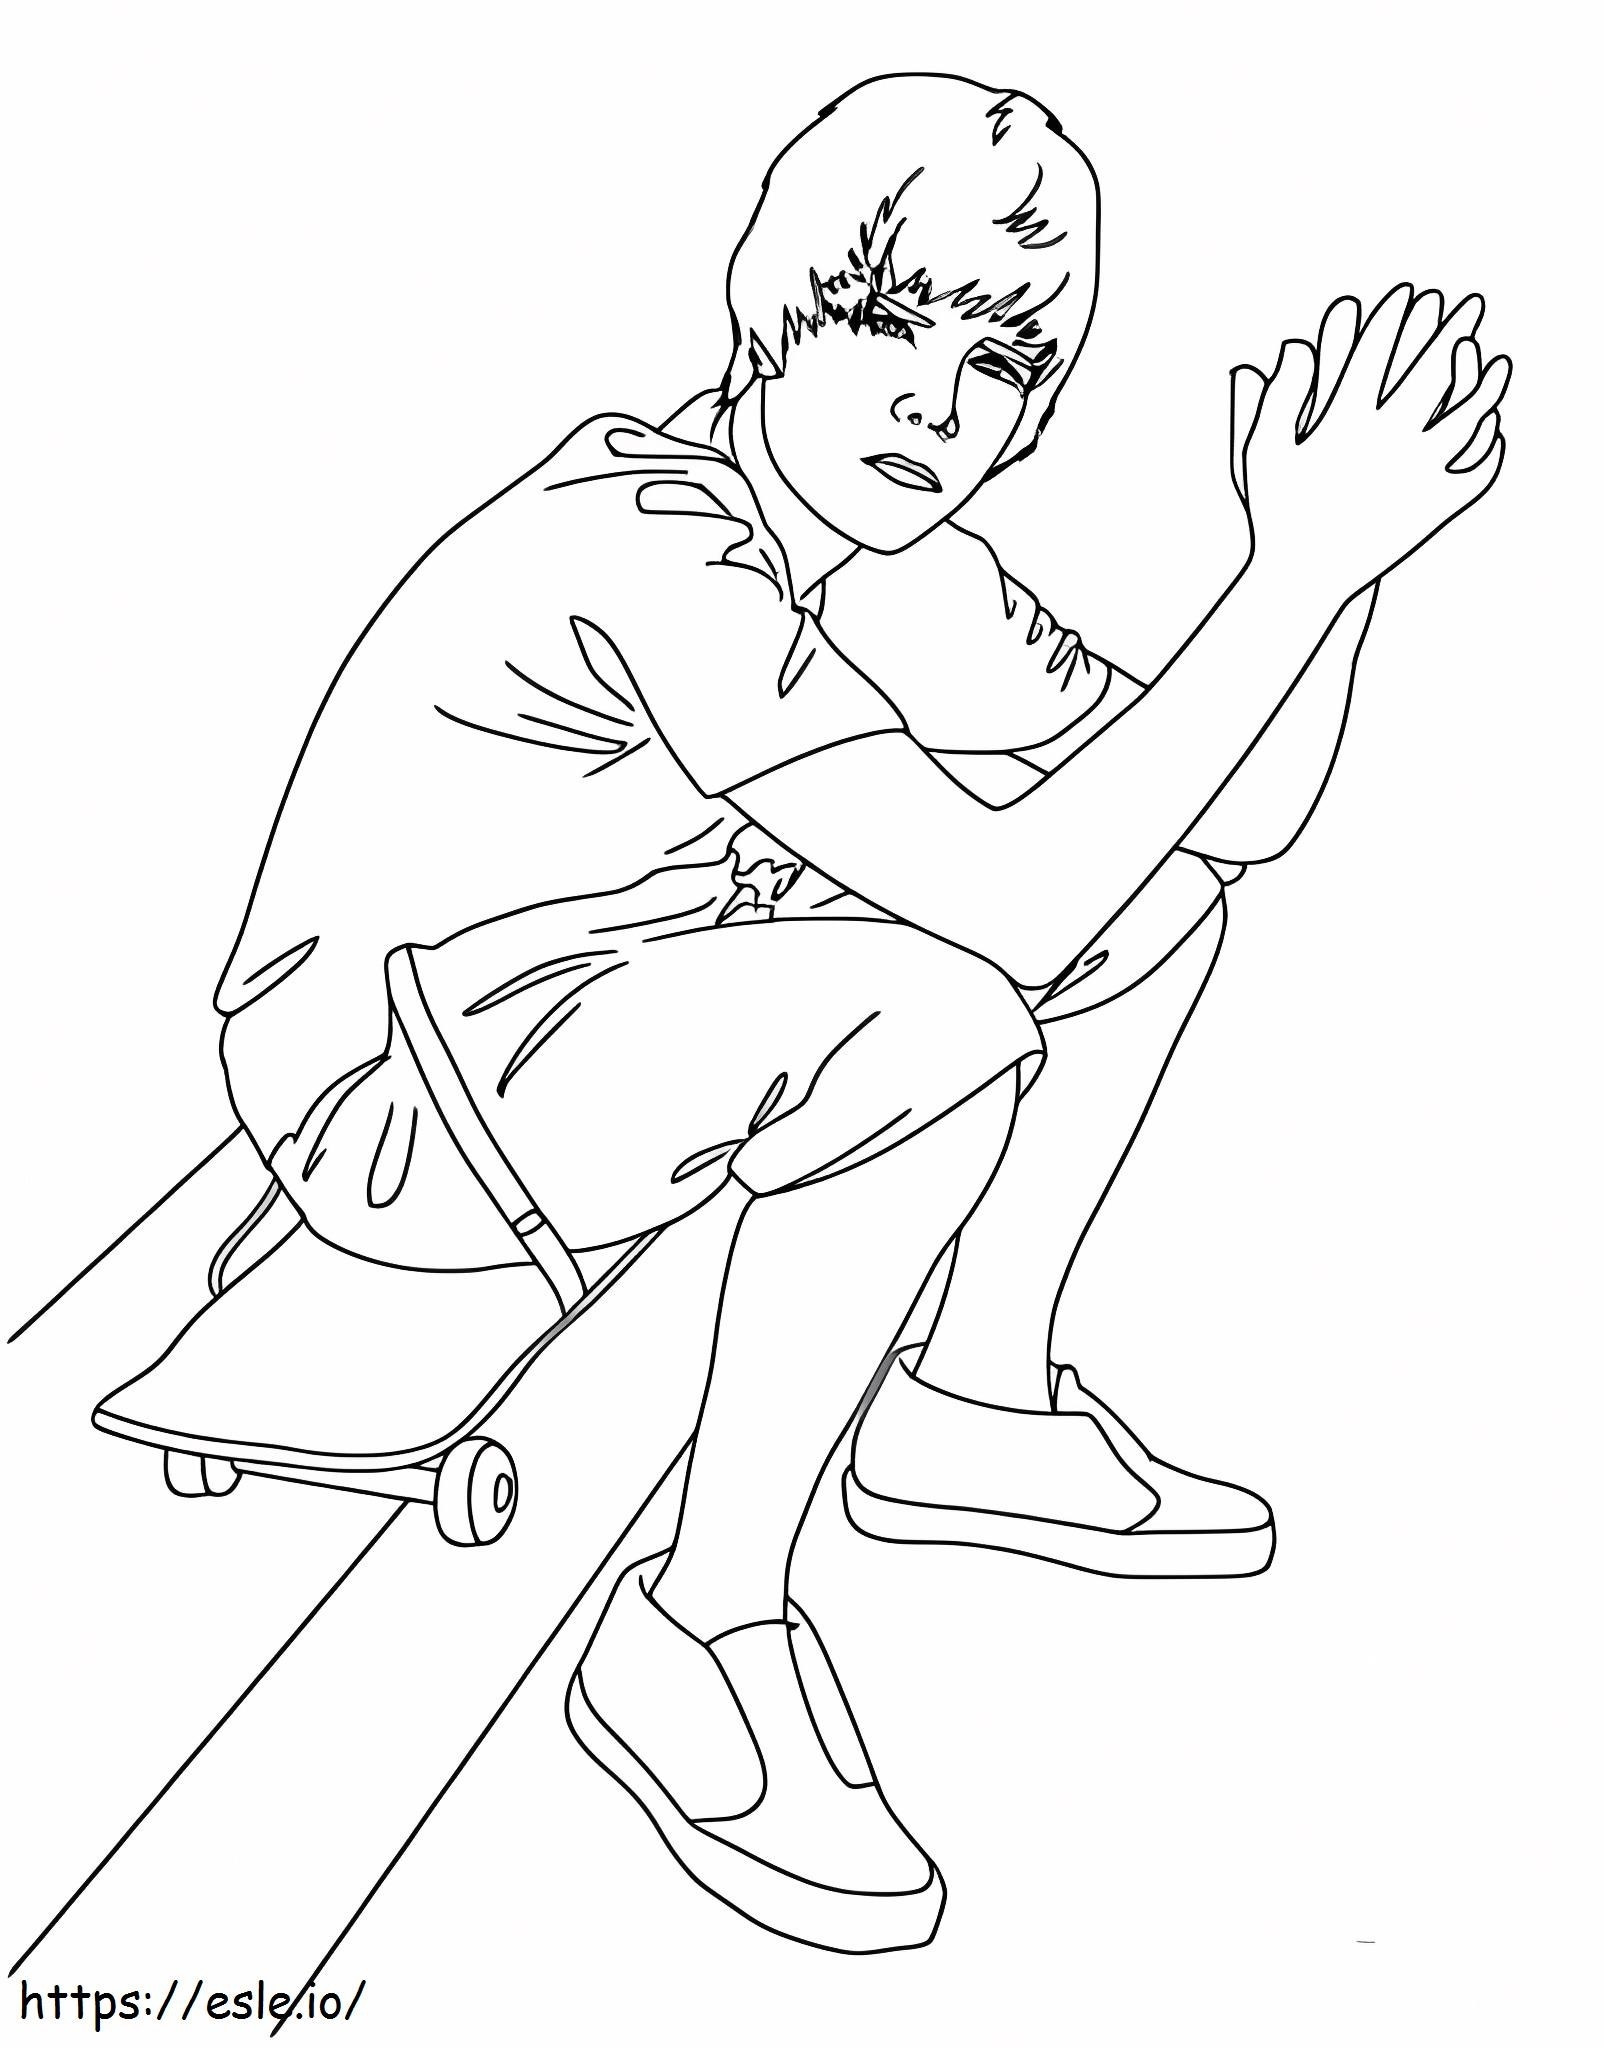 Justin Bieber Sitting coloring page